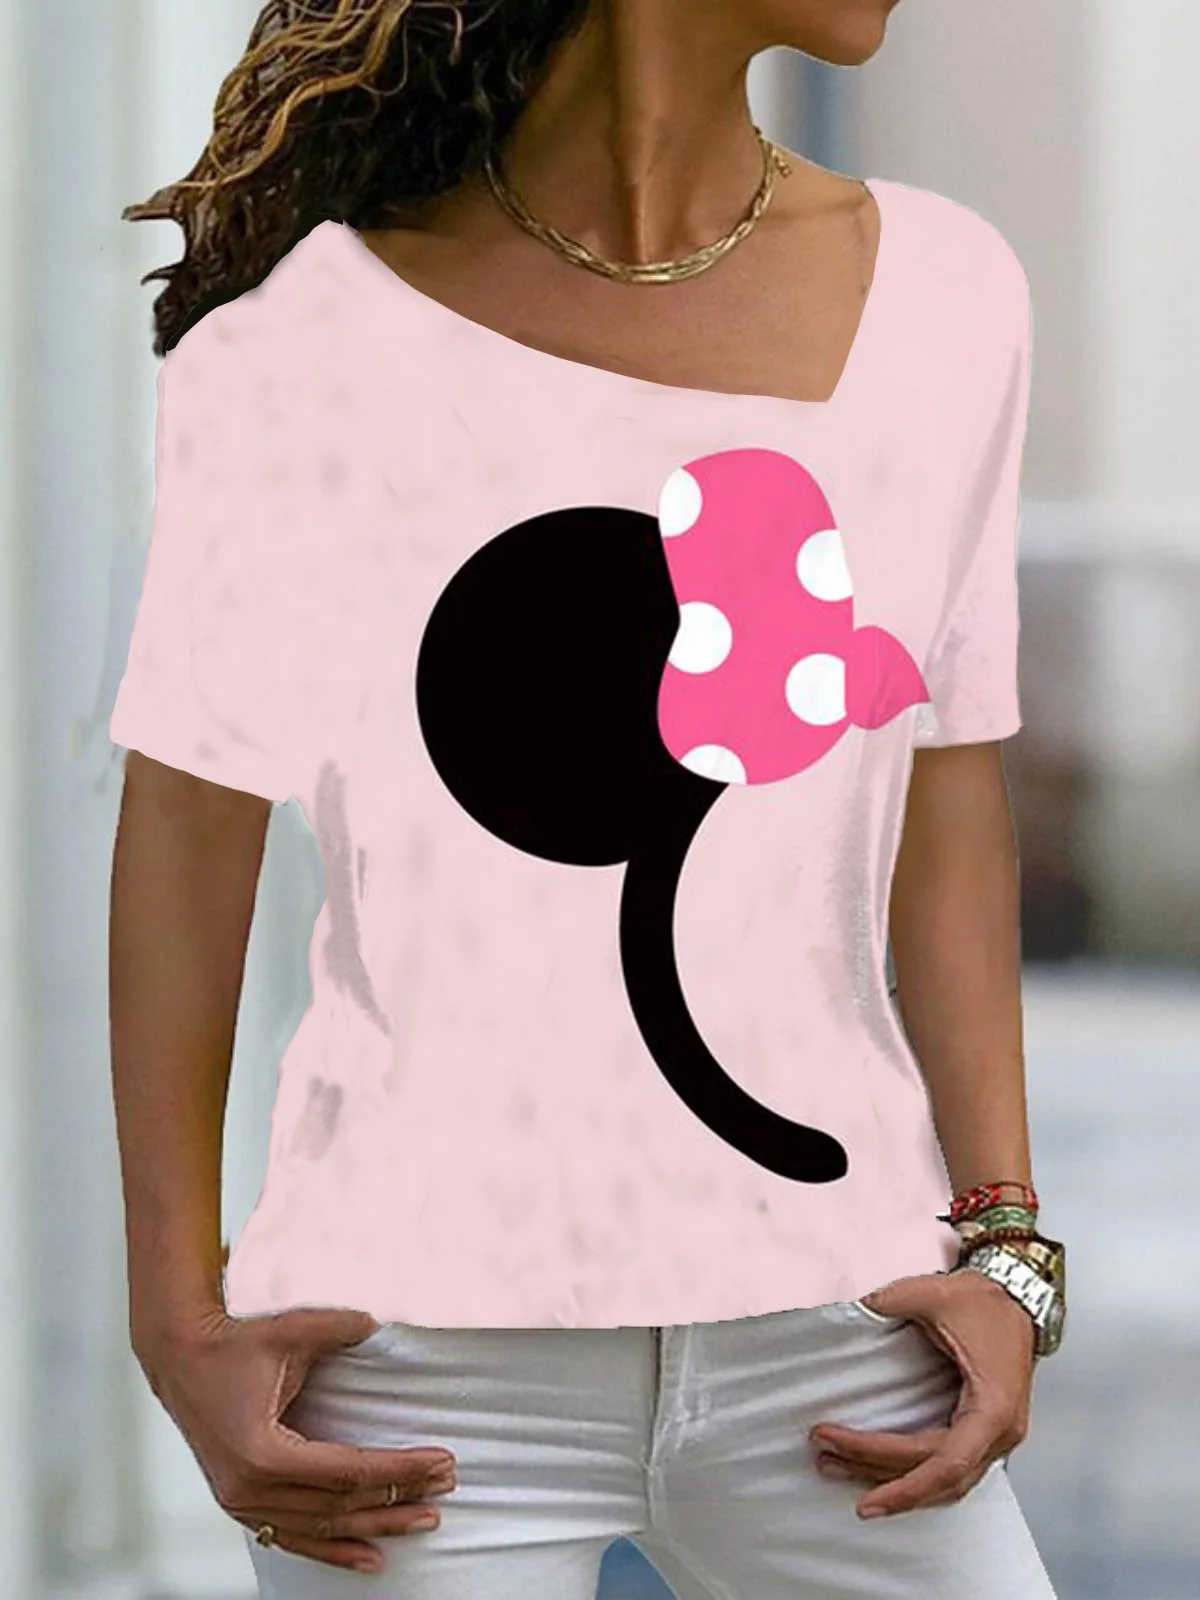 Minnie Mouse Summer T-shirts Oversize Women's T-shirt Cute New in Outdoor Clothes for Woman V Neck Crop Top With Sleeves Fashion